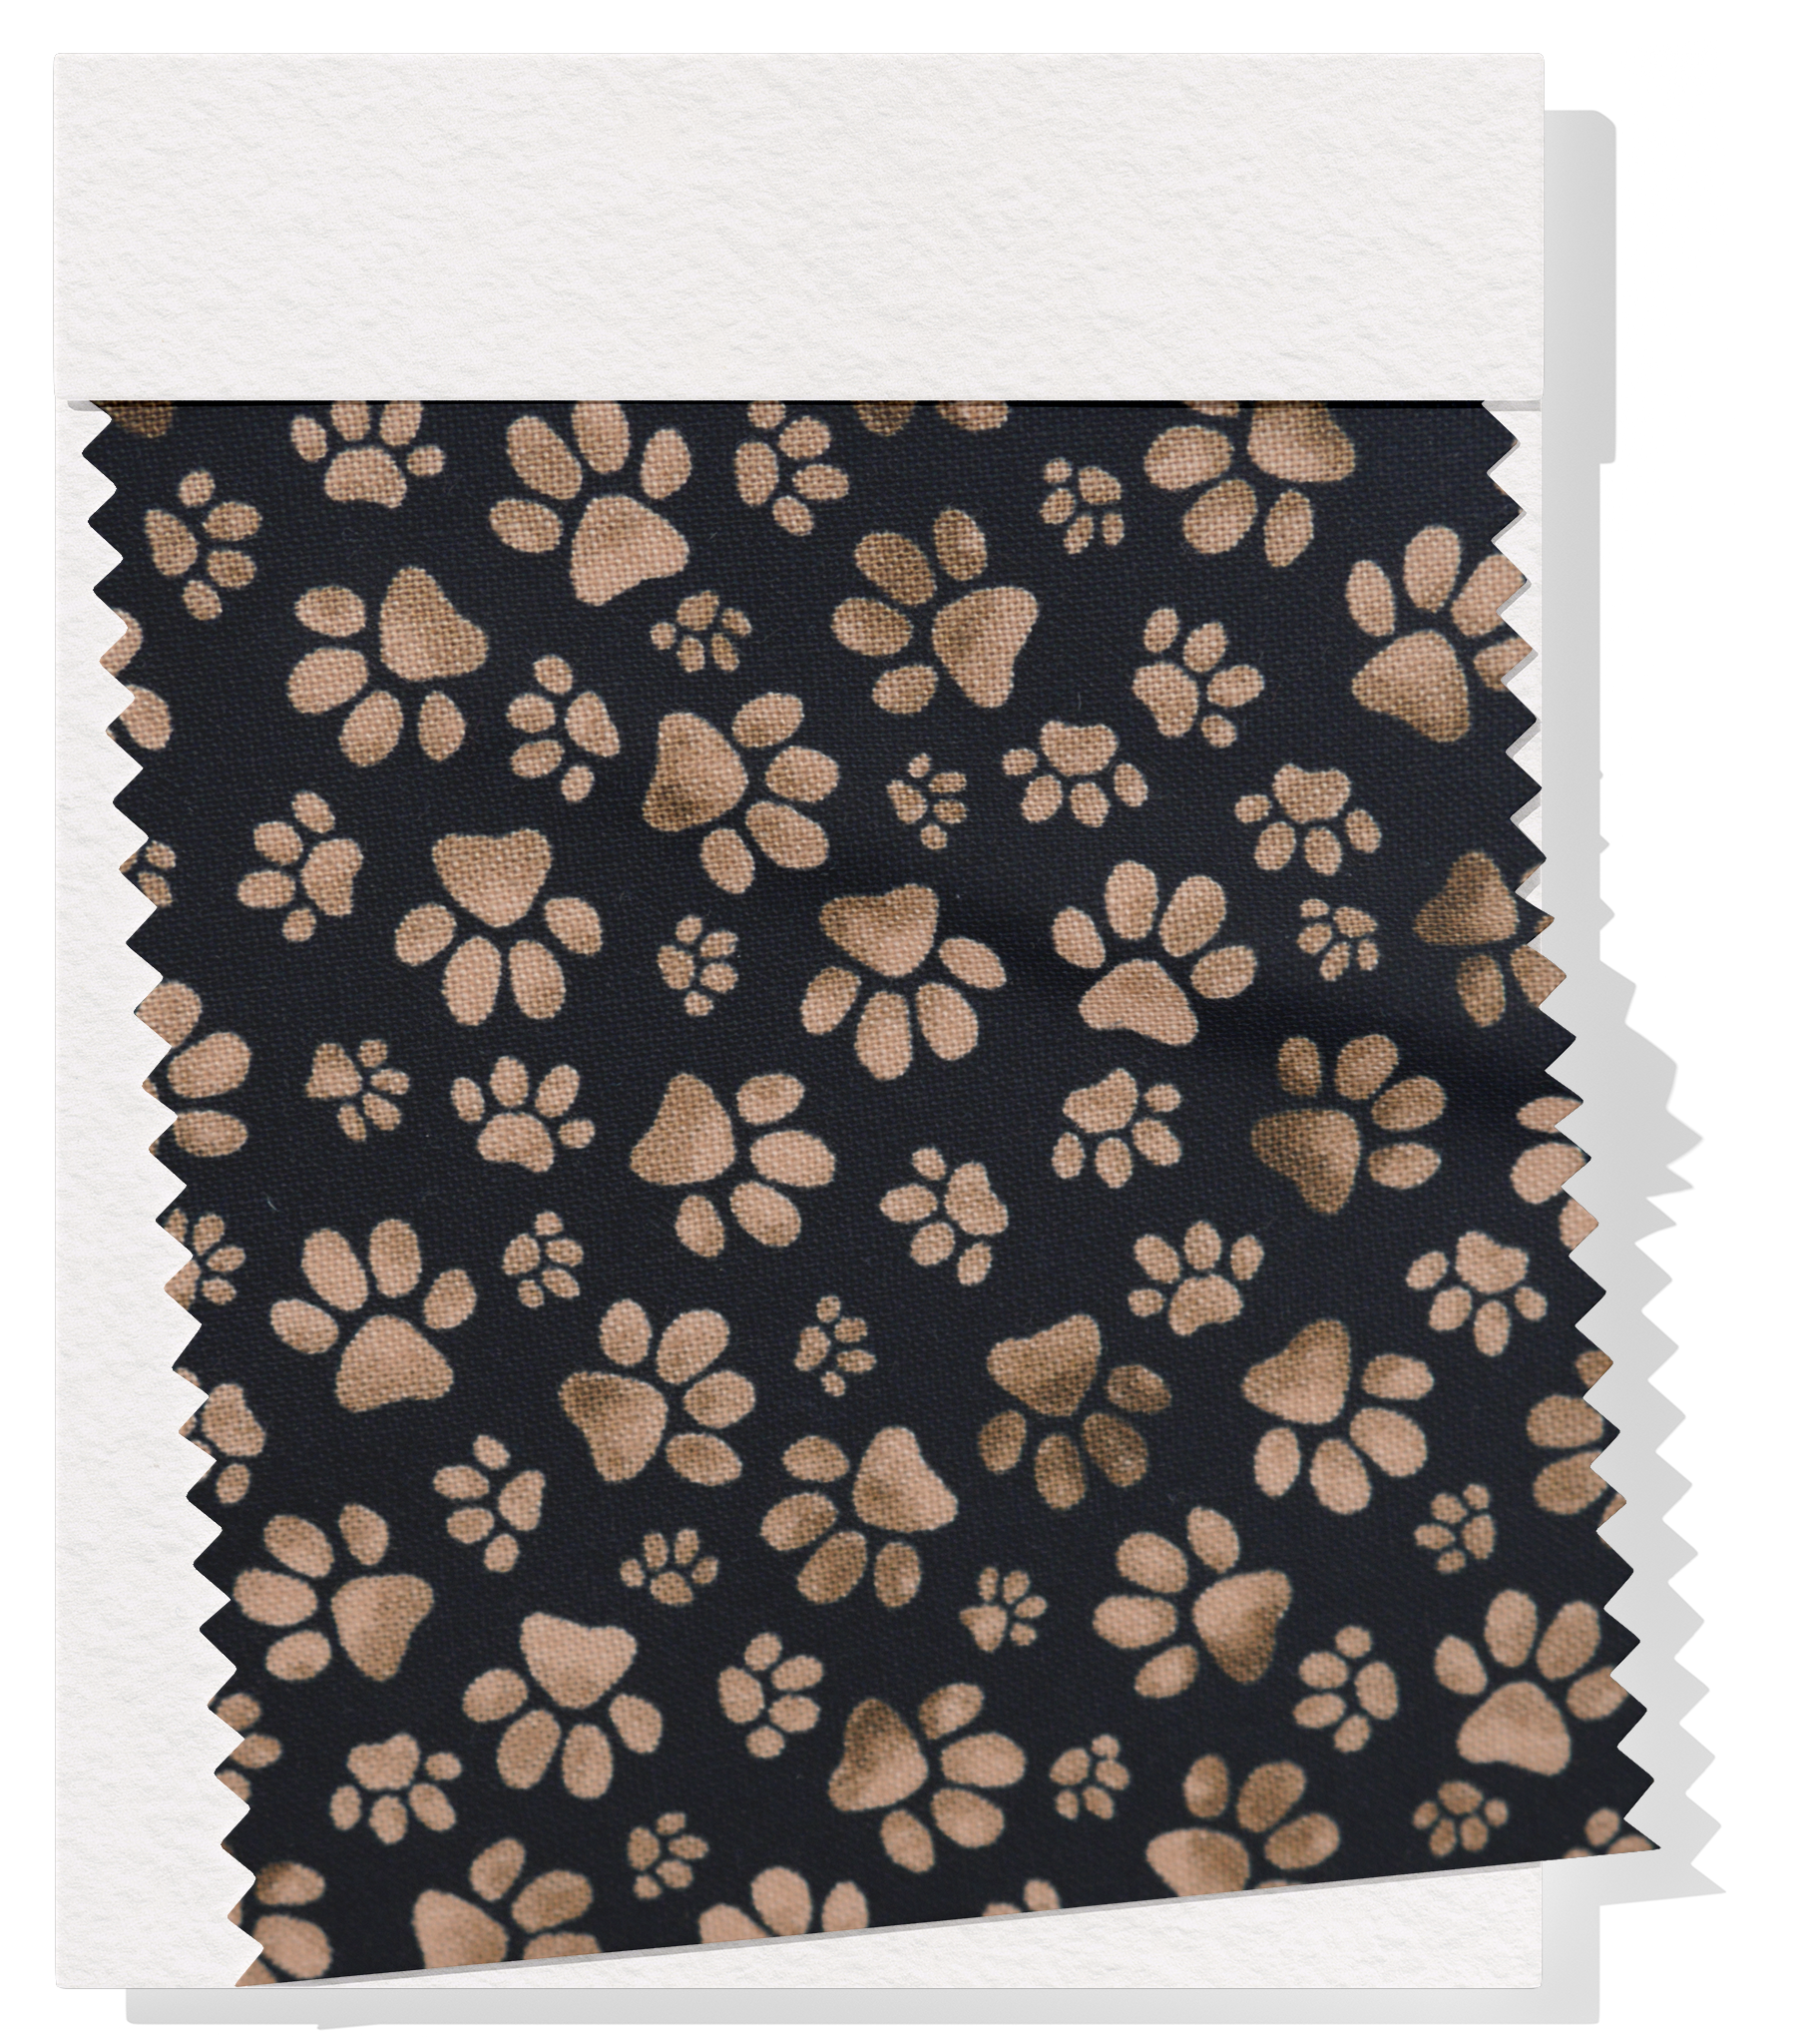 Craft Cotton $10.00p/m Dog Paws Black and Brown